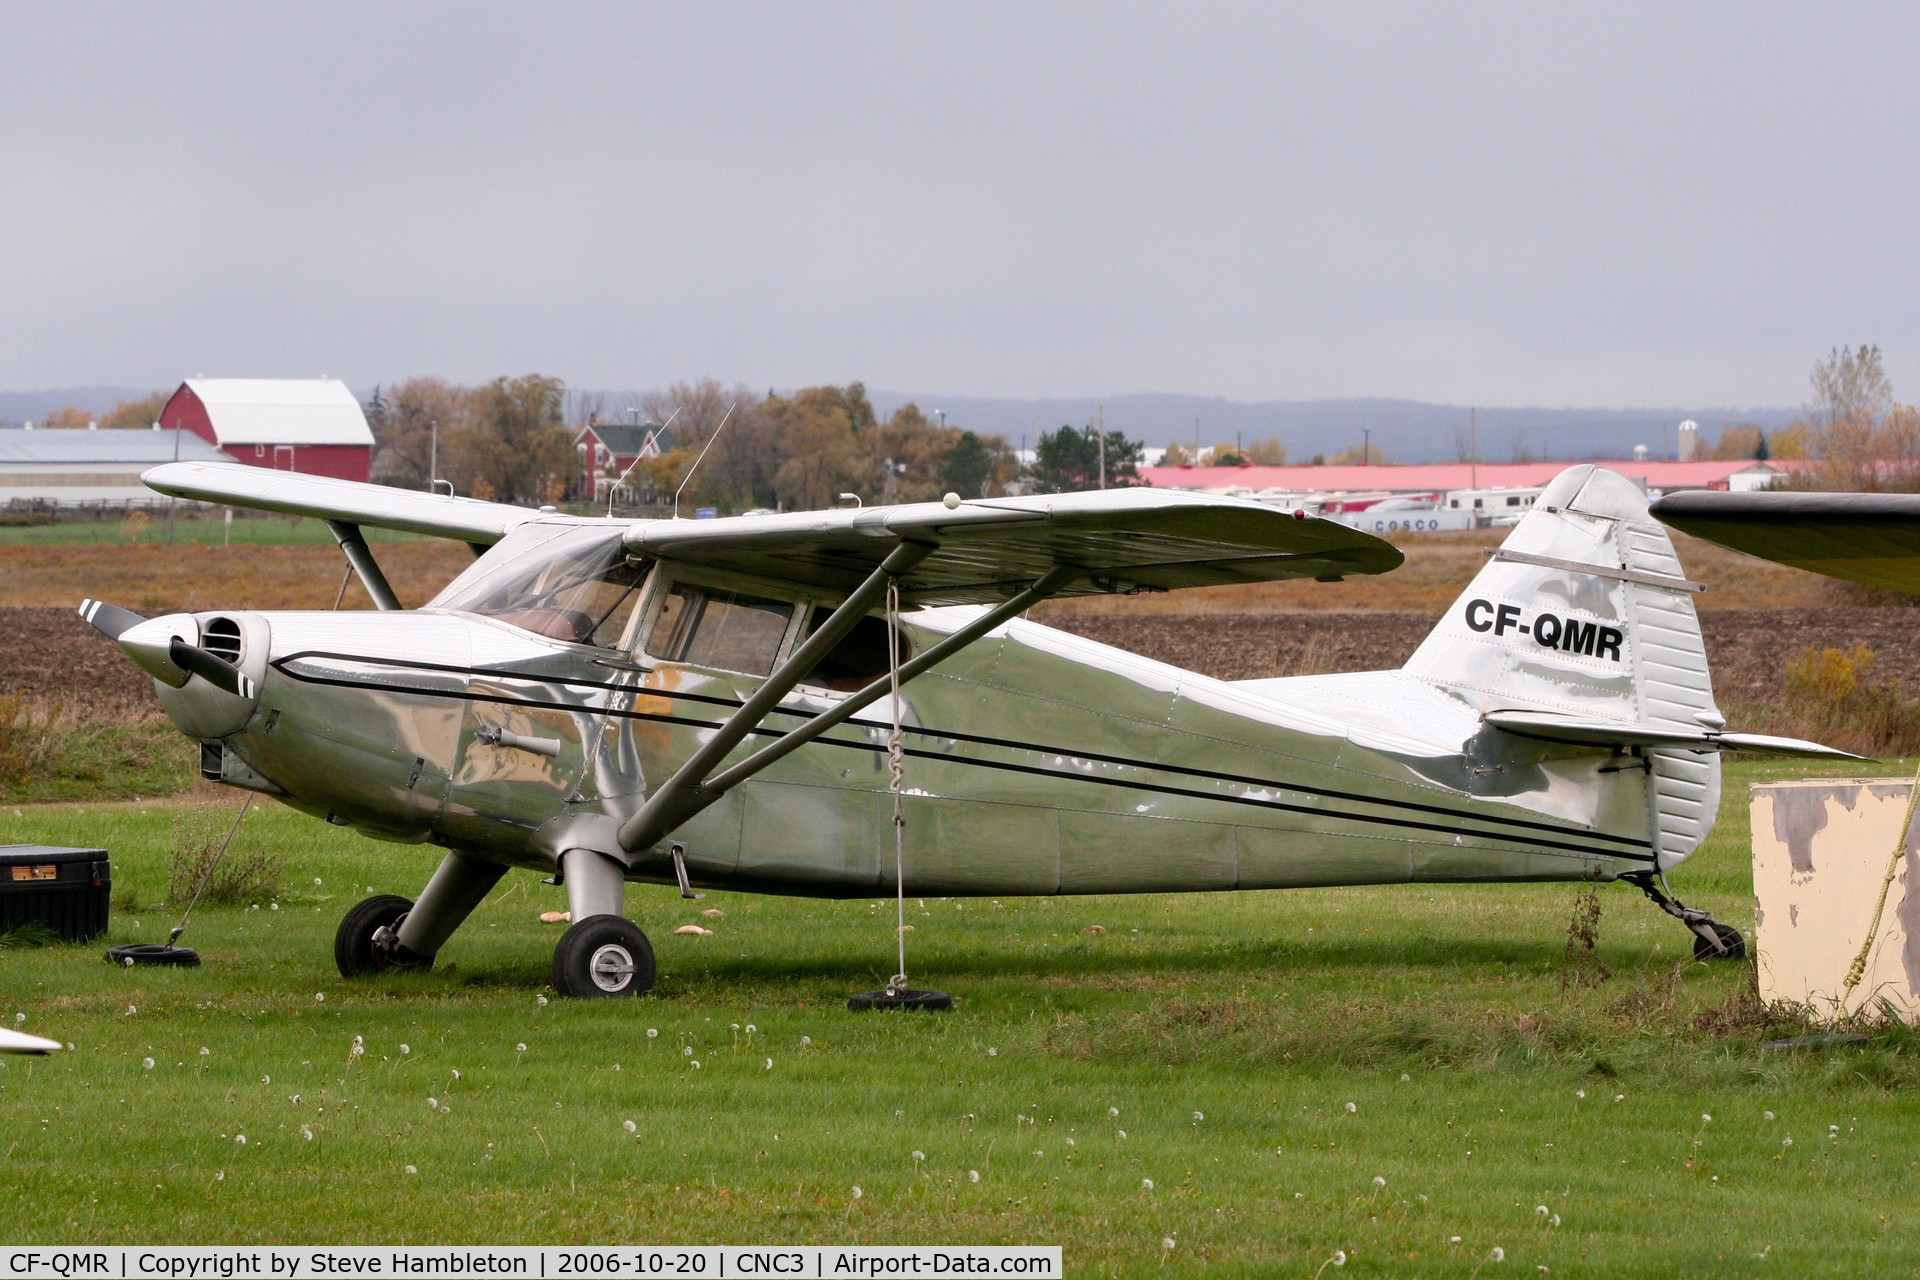 CF-QMR, 1946 Stinson 108-1 Voyager C/N 108-772, Love the bare metal finish on this one!